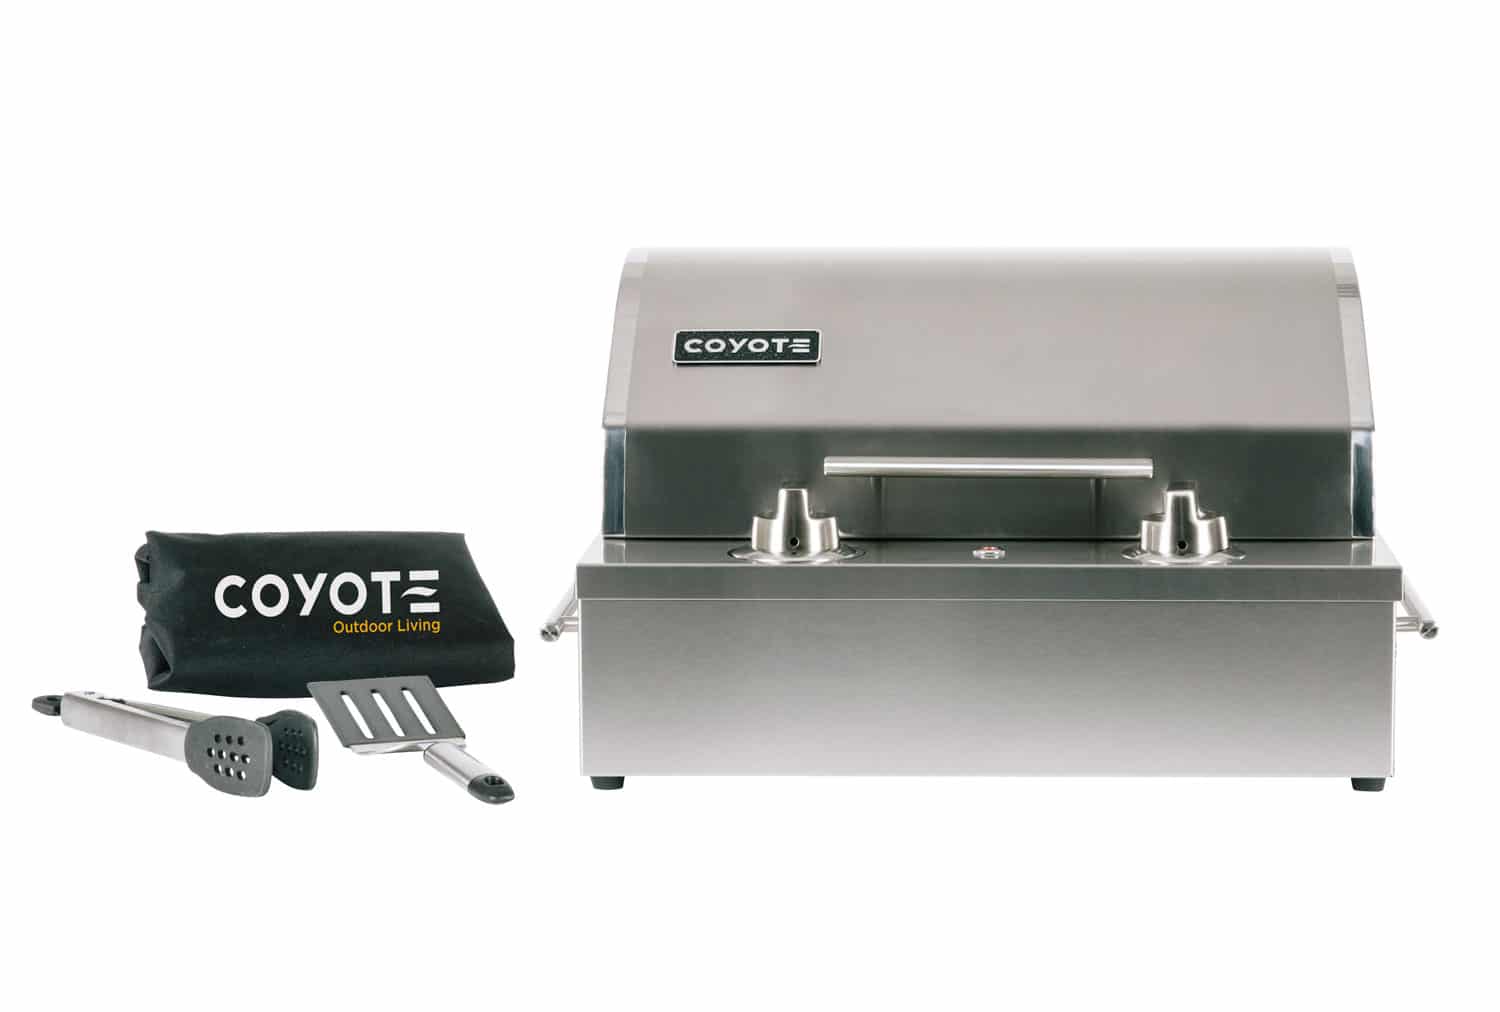 Coyote Stainless Steel Portable Electric Grill at ABT